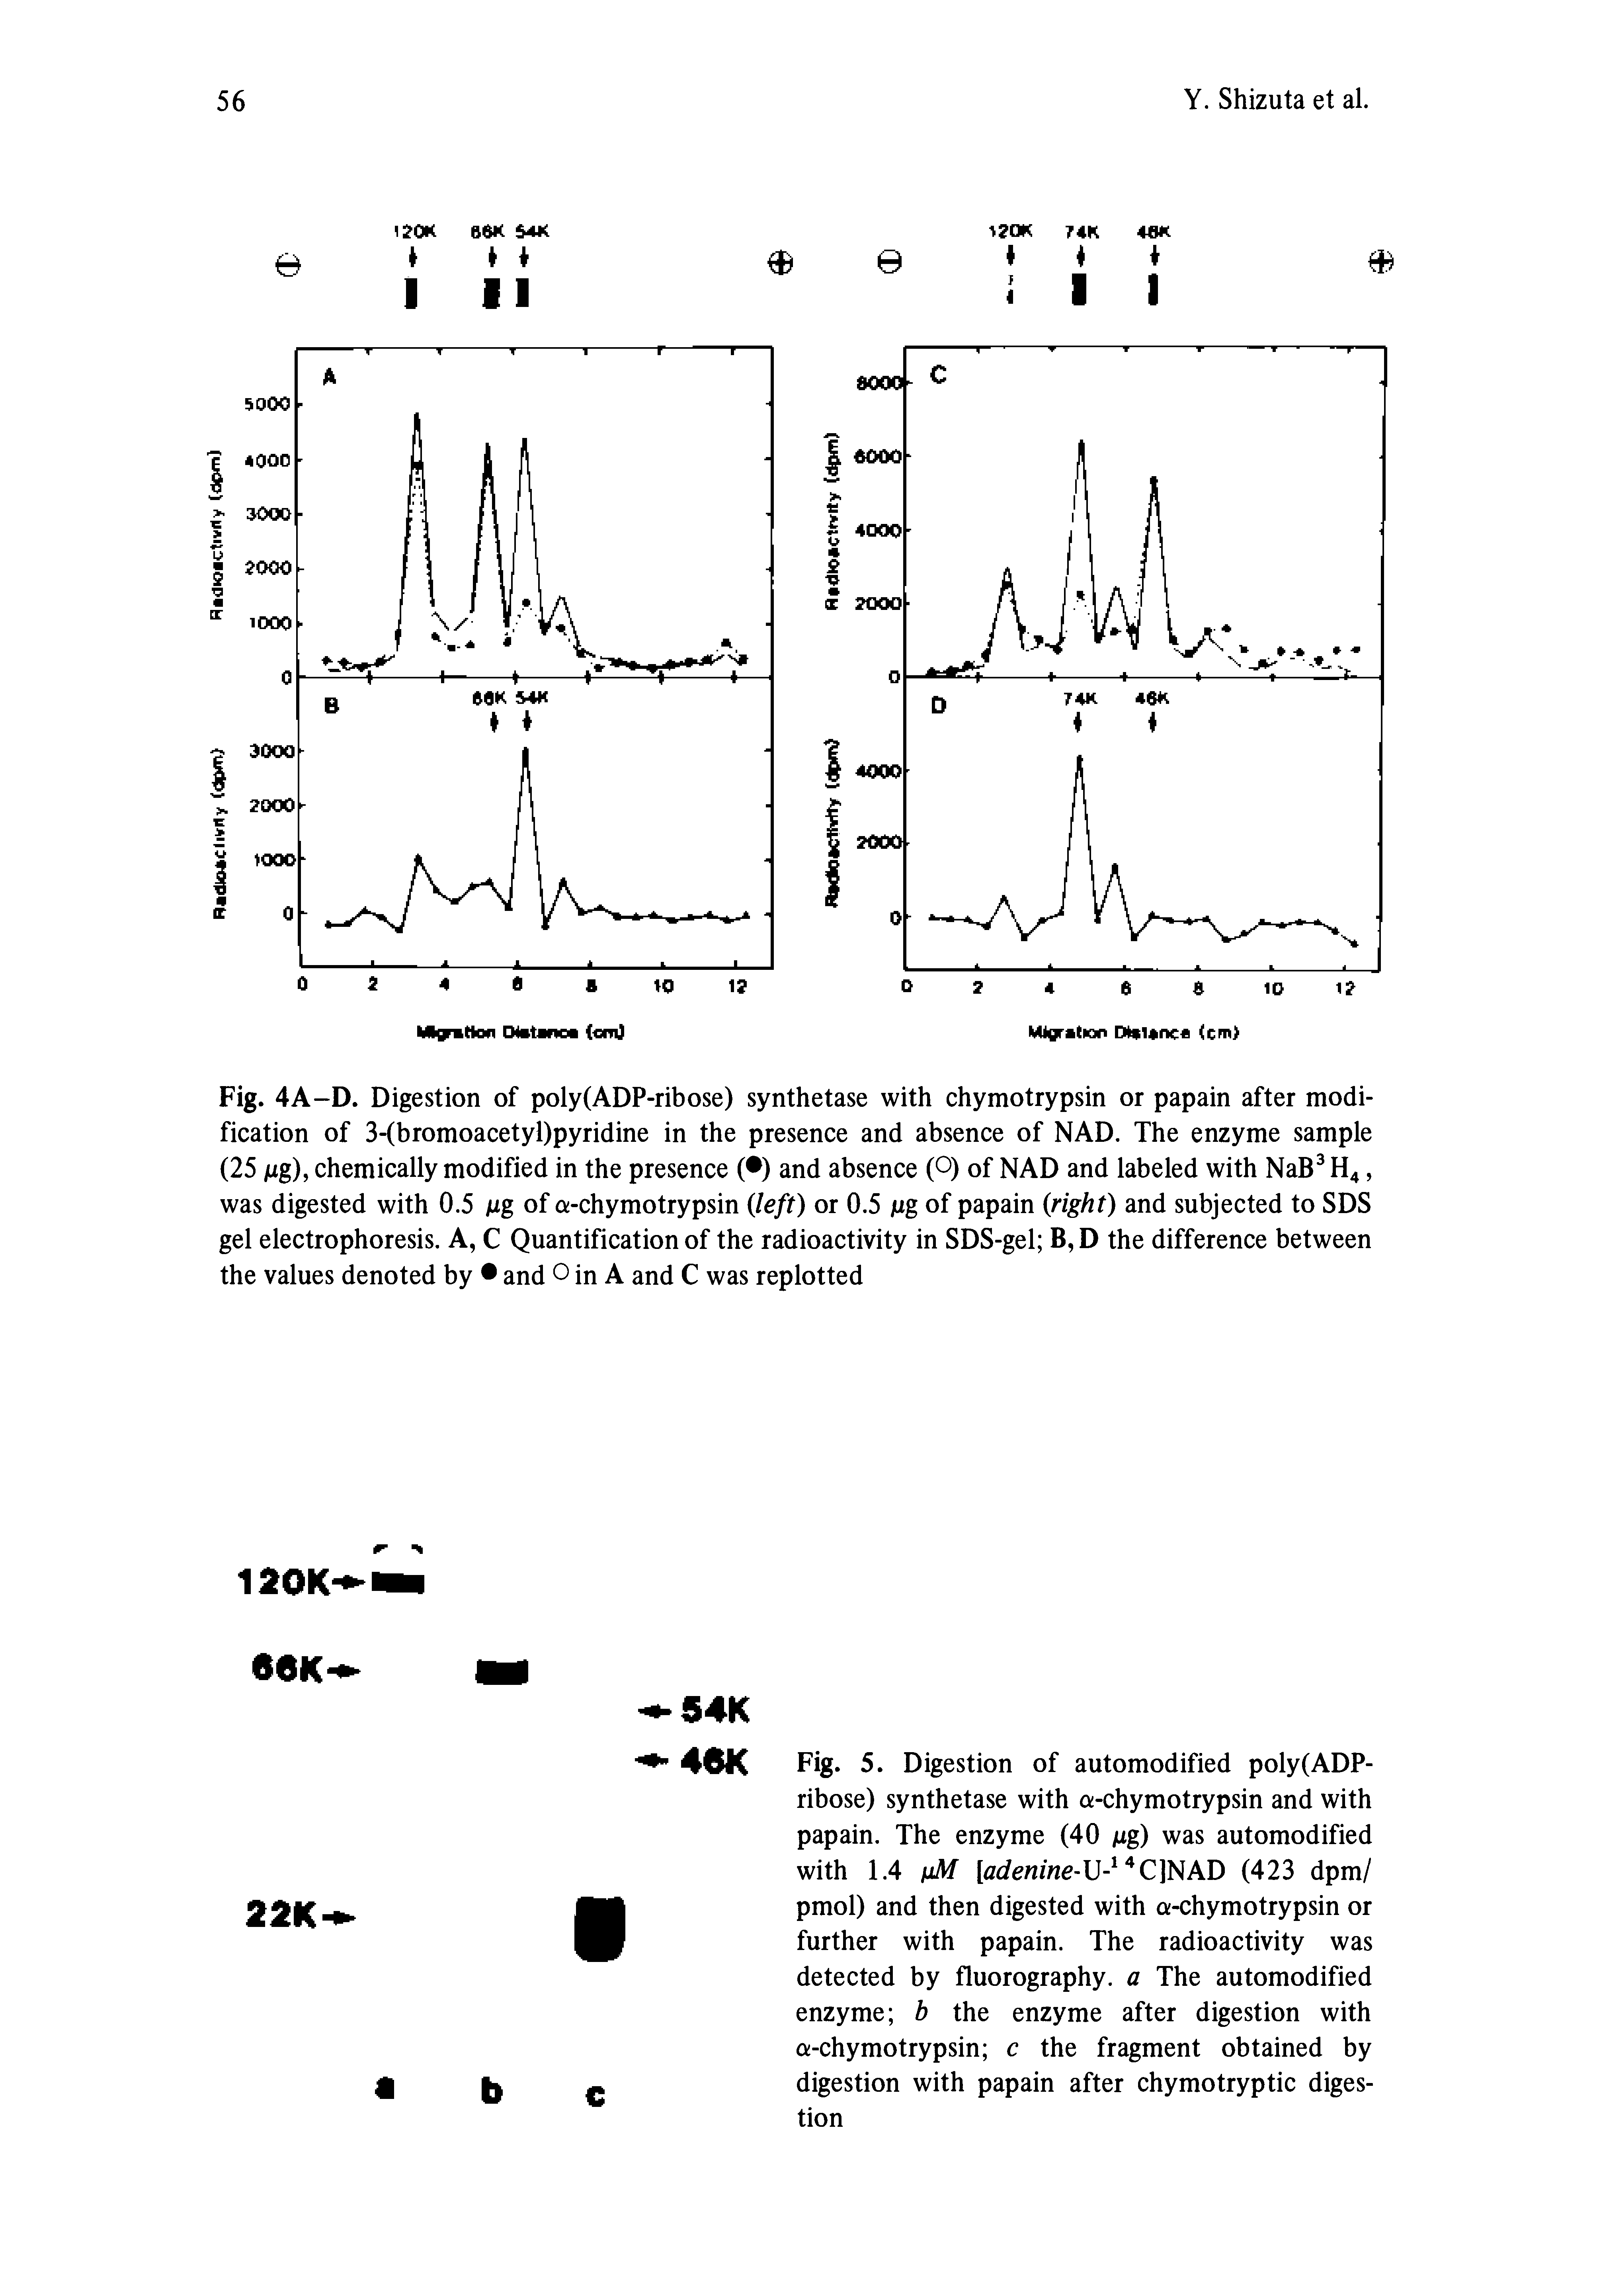 Fig. 4A-D. Digestion of poly(ADP-ribose) synthetase with chymotrypsin or papain after modification of 3-(bromoacetyl)pyridine in the presence and absence of NAD. The enzyme sample (25 jug), chemically modified in the presence ( ) and absence (O) of NAD and labeled with NaB H4, was digested with 0.5 Mg of a-chymotrypsin (left) or 0.5 jug of papain (right) and subjected to SDS gel electrophoresis. A, C Quantification of the radioactivity in SDS-gel B, D the difference between the values denoted by and O in A and C was replotted...